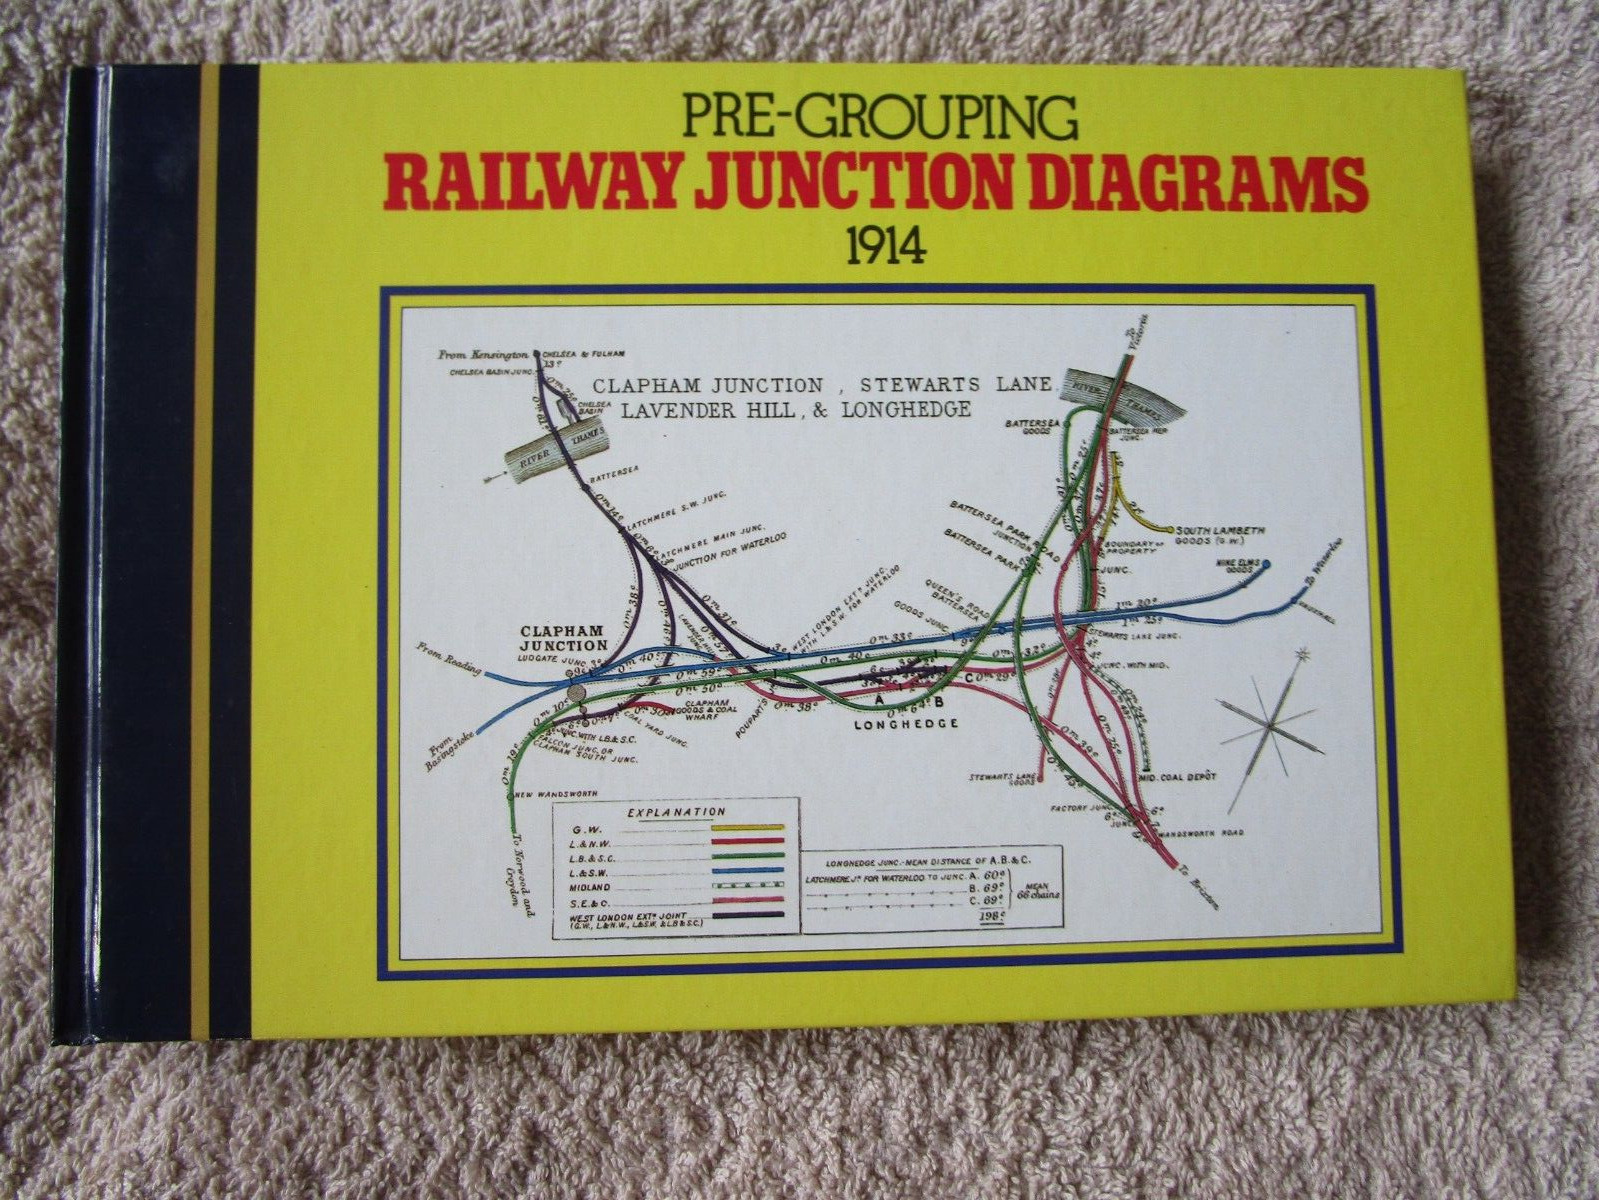 PRE-GROUPING RAILWAY JUNCTION DIAGRAMS 1914